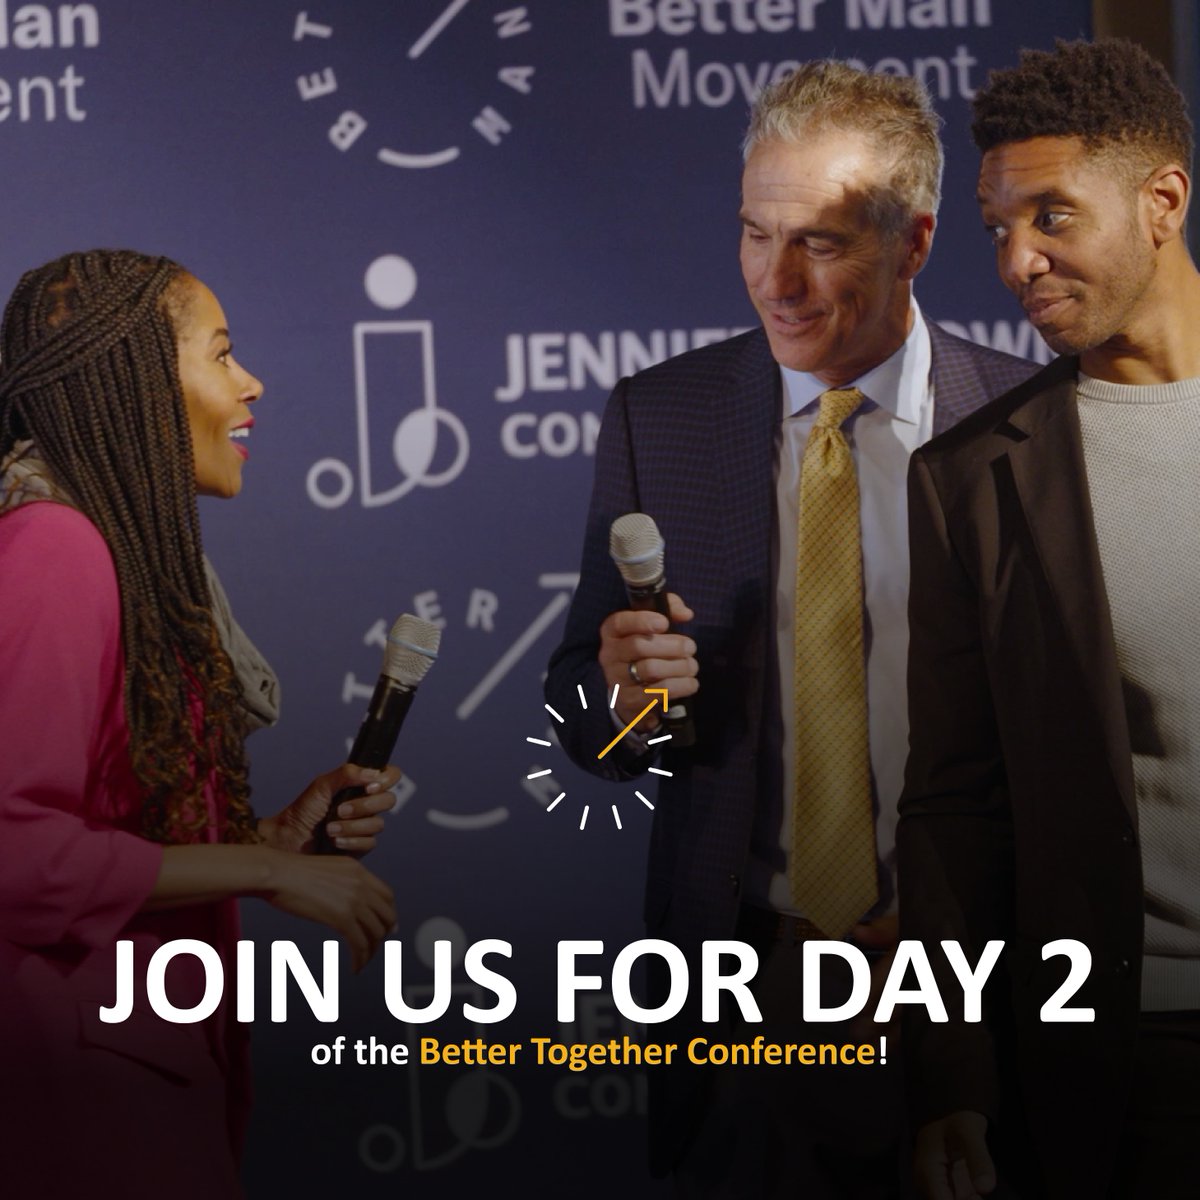 We are ready to ACTIVATE, today at the Better Together Conference! Do you want to join us for our day of learning? Contact our team for more info. #BetterTogetherConference